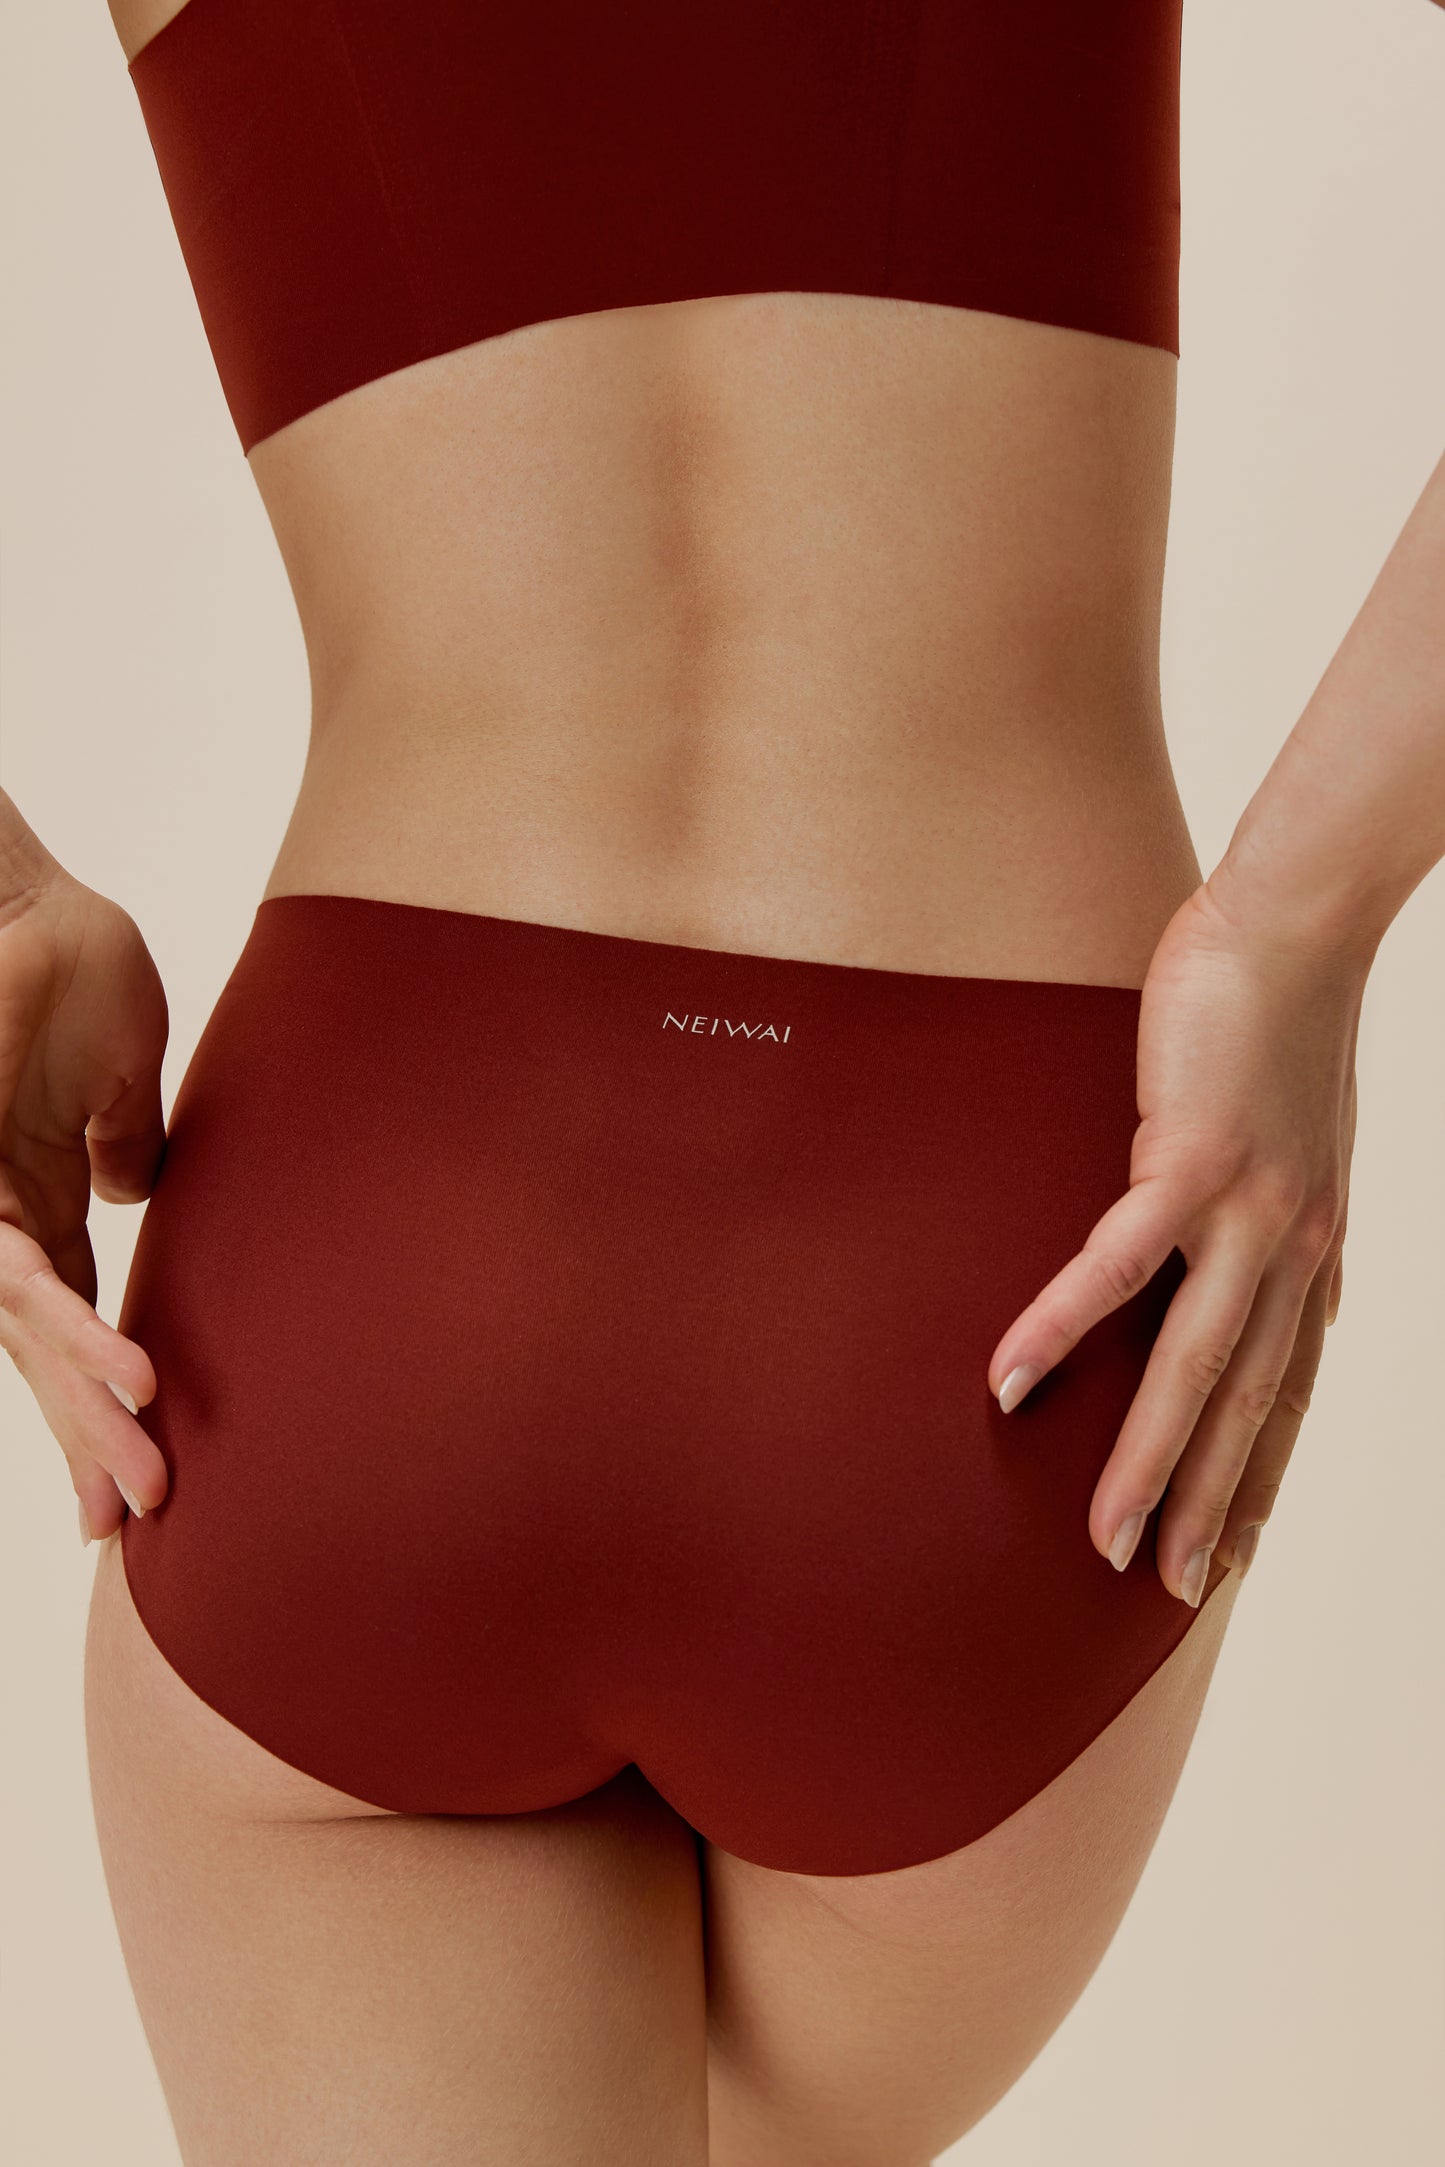 back of woman in maroon brief with NEIWAI printed on the waist